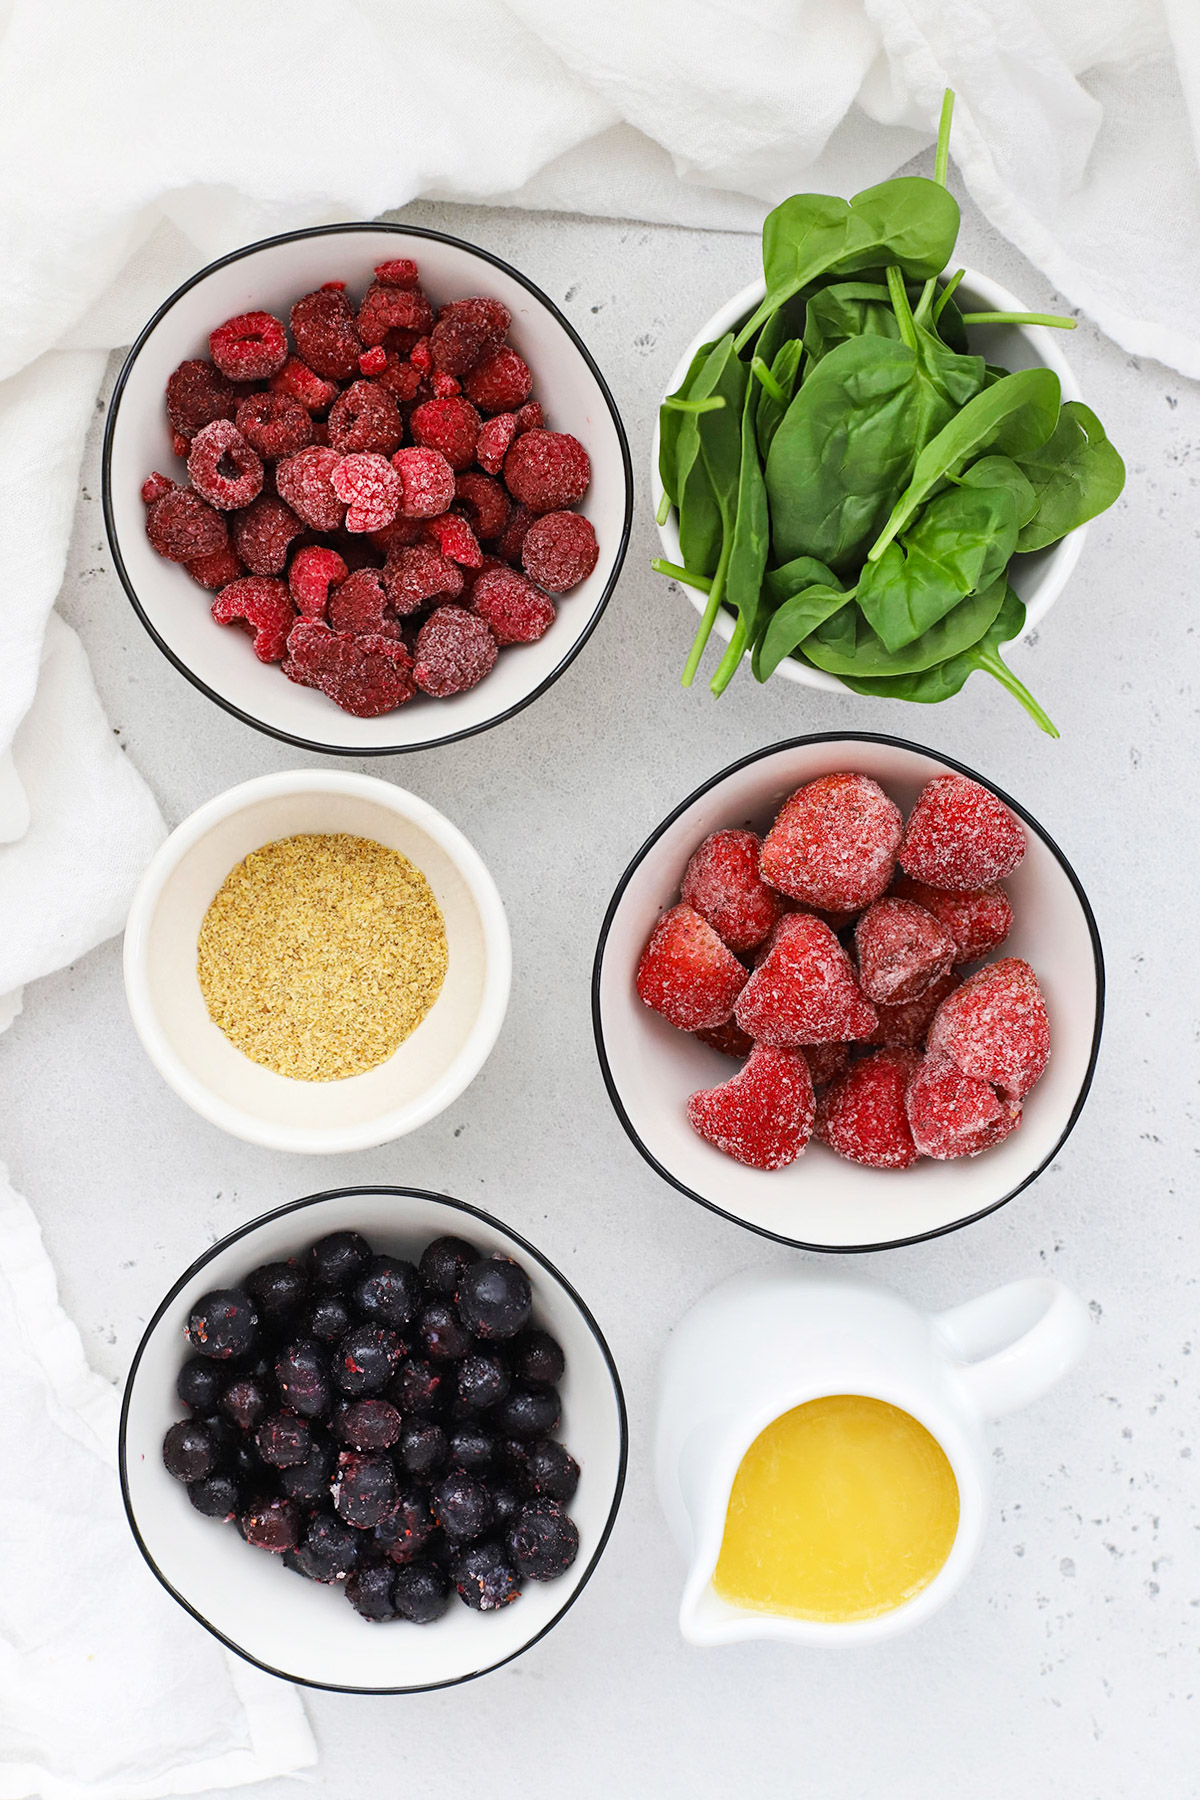 Overhead view of ingredients for berry smoothies